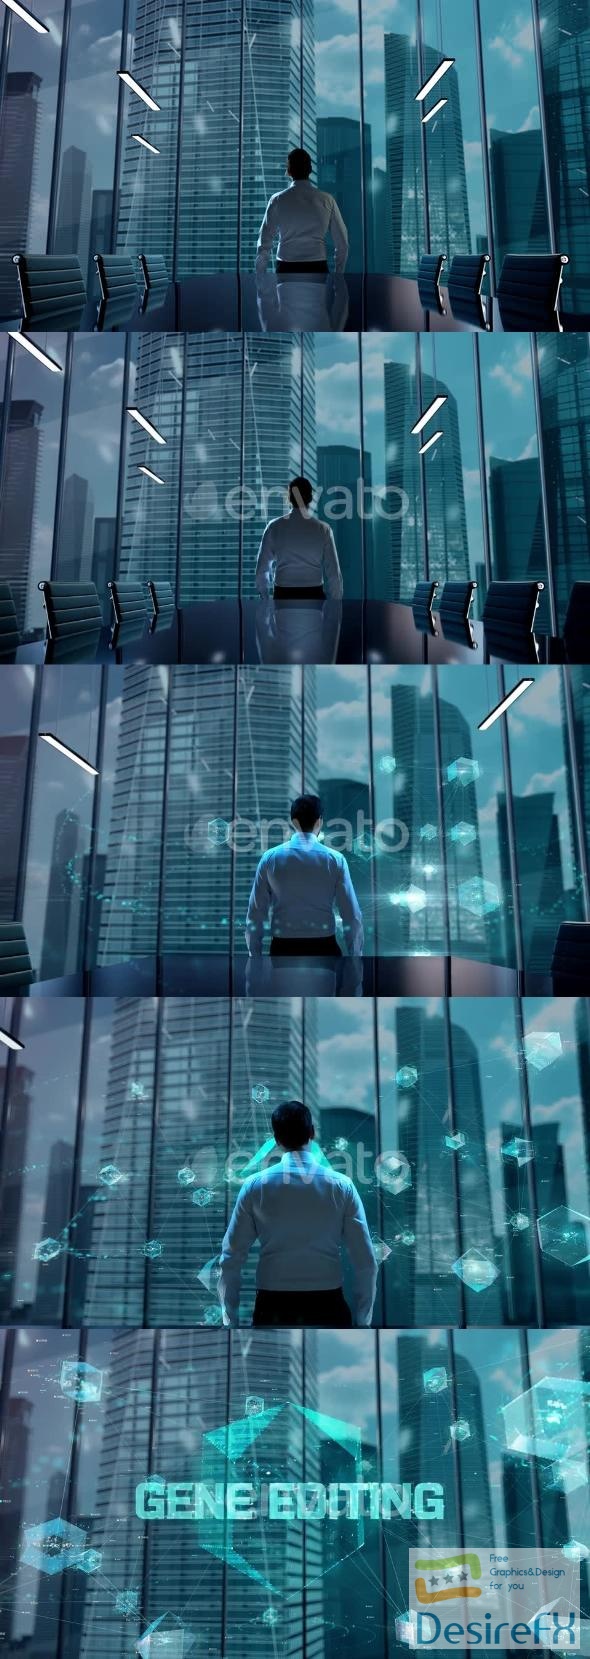 VideoHive Gene Editing Businessman Working in Office Among Skyscrapers Hologram Concept 47581315